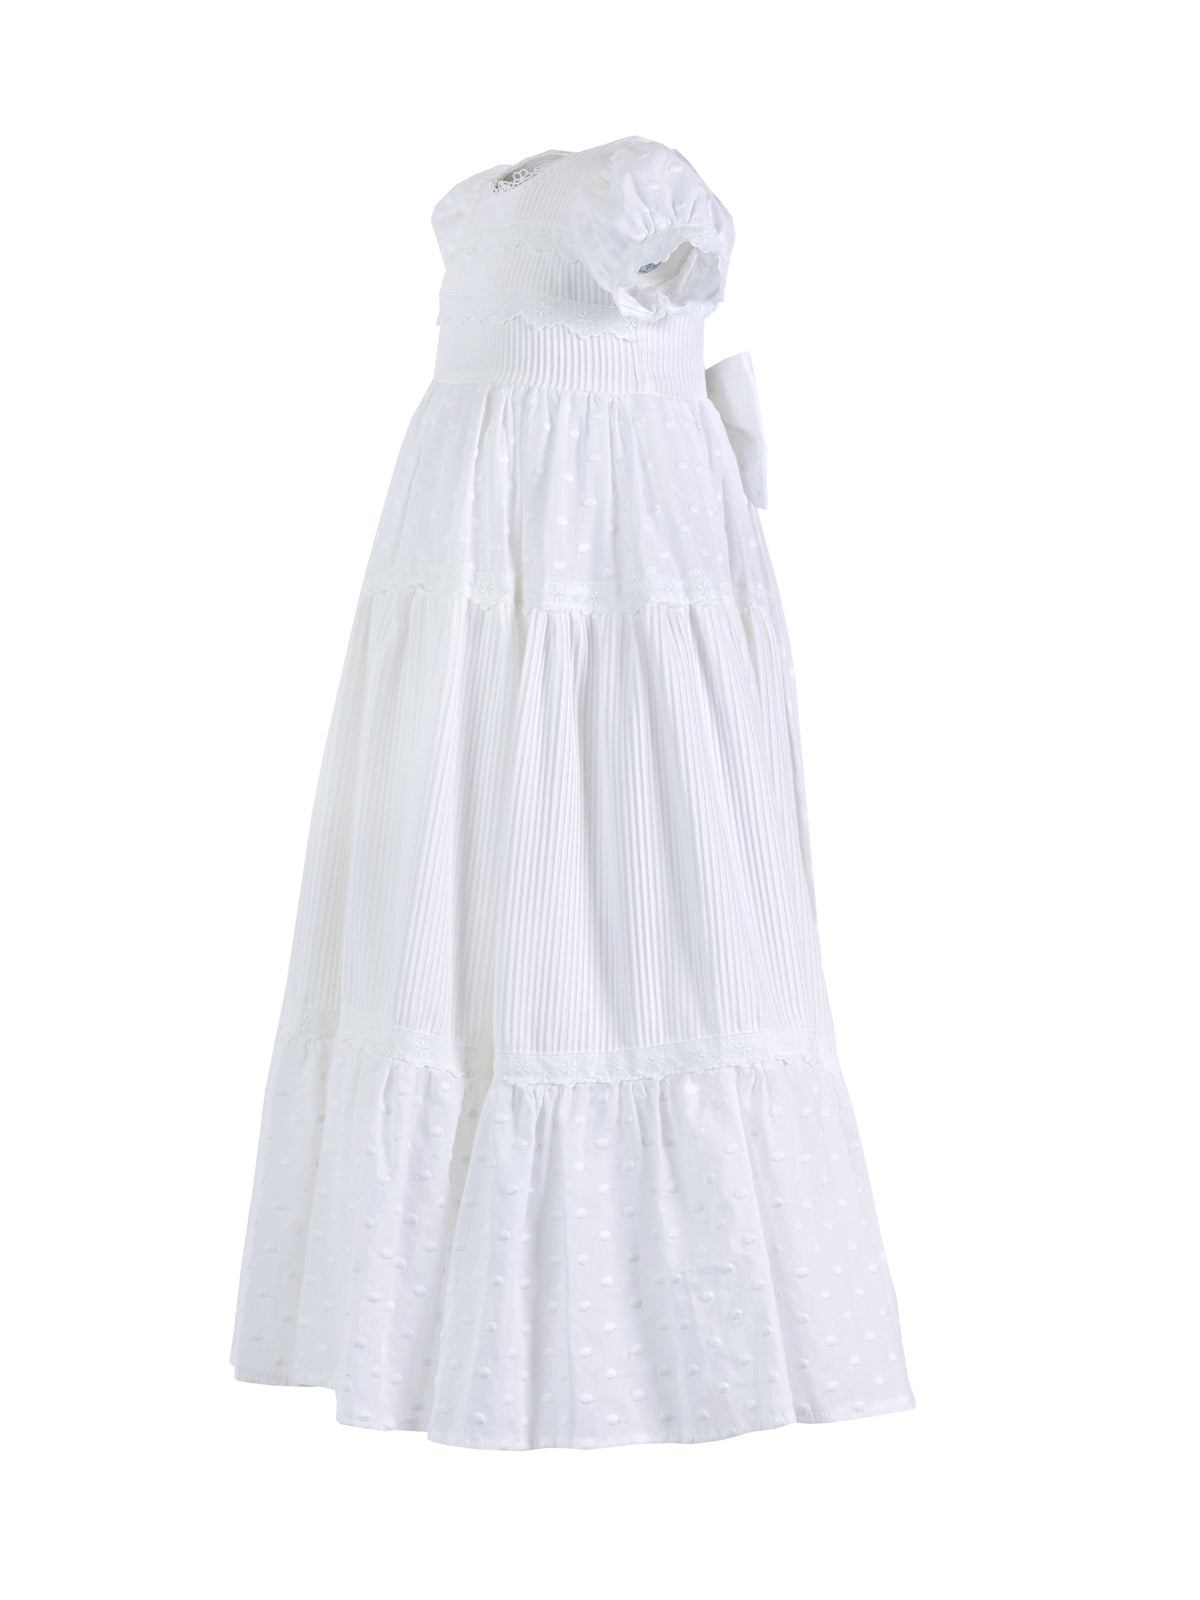 Long Christening Gown for newborn - PEACE